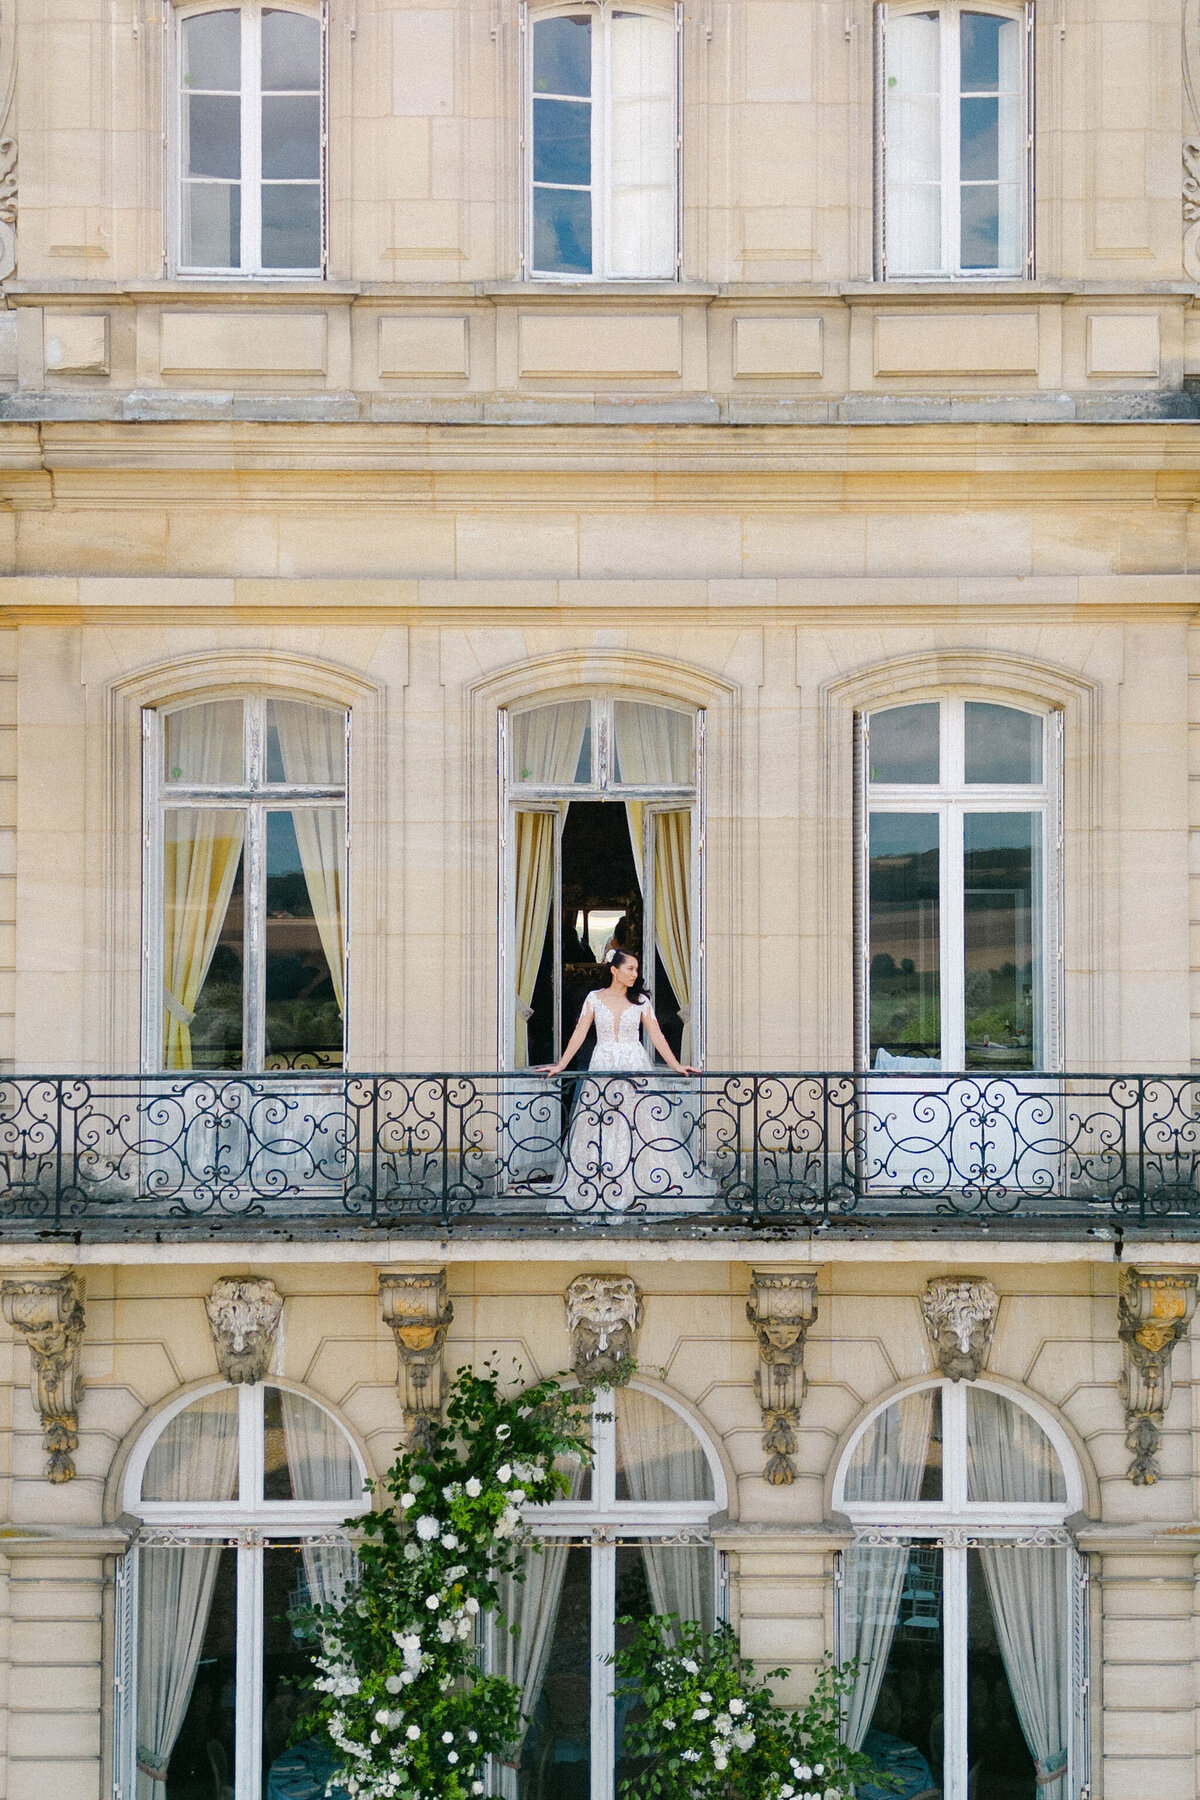 Jennifer Fox Weddings English speaking wedding planning & design agency in France crafting refined and bespoke weddings and celebrations Provence, Paris and destination 71